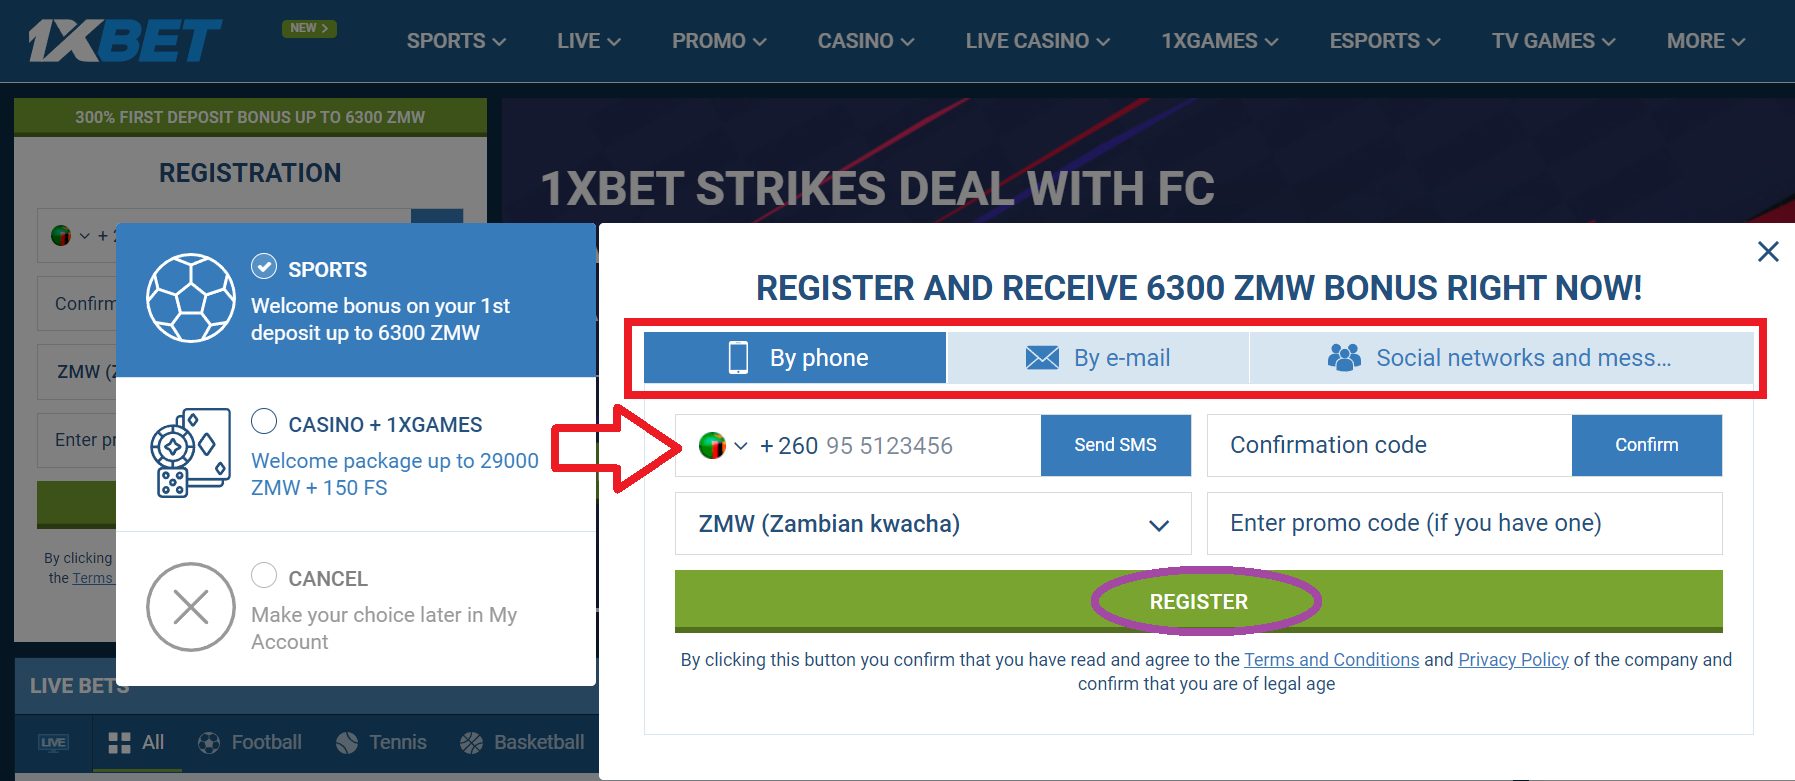 registration within 1xBet by phone number